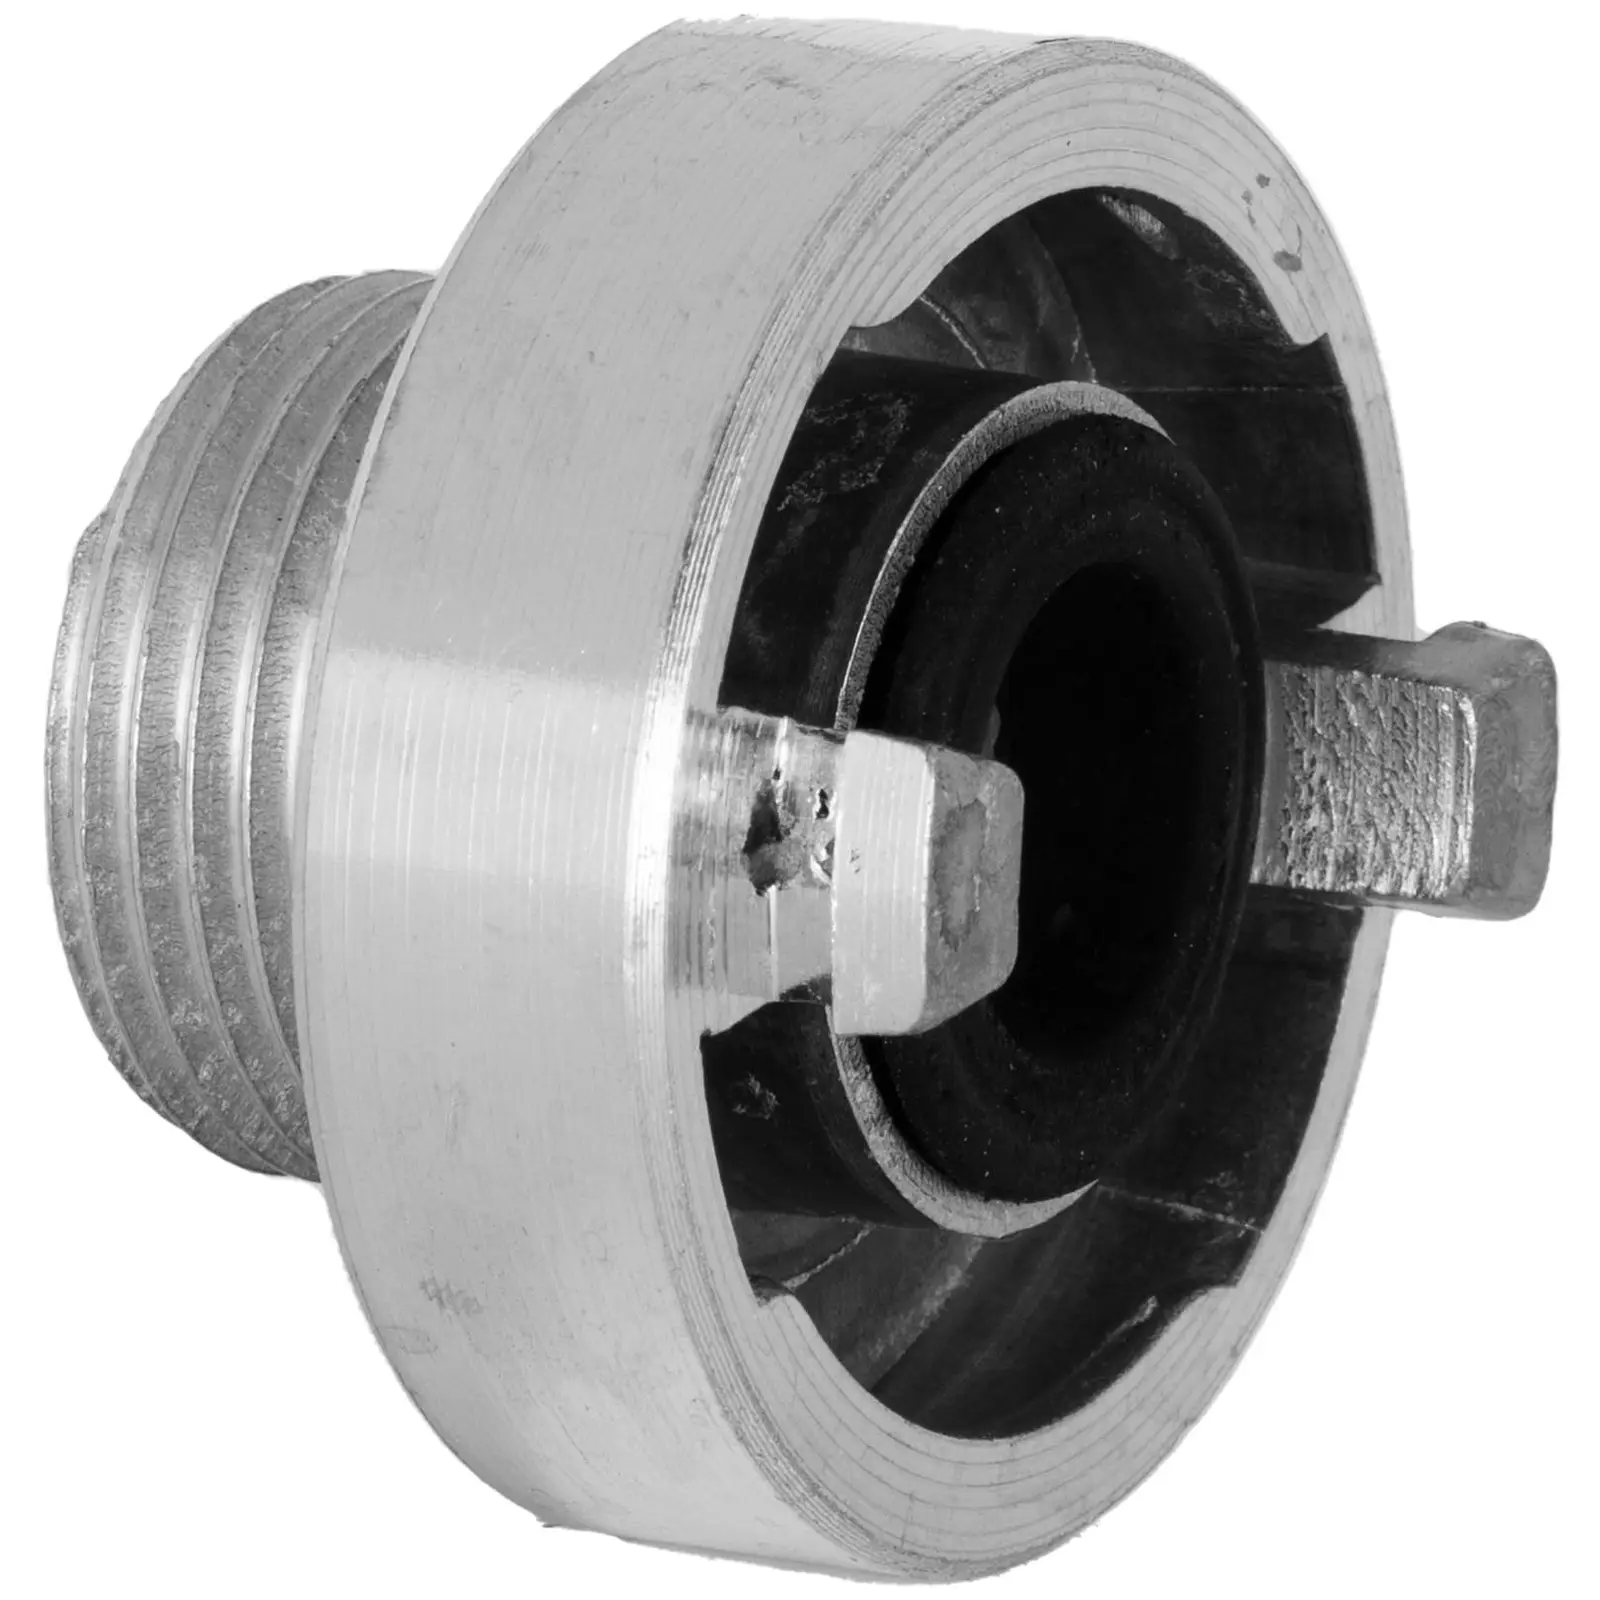 Storz Coupling - with external thread - hose size 1" -  Storz